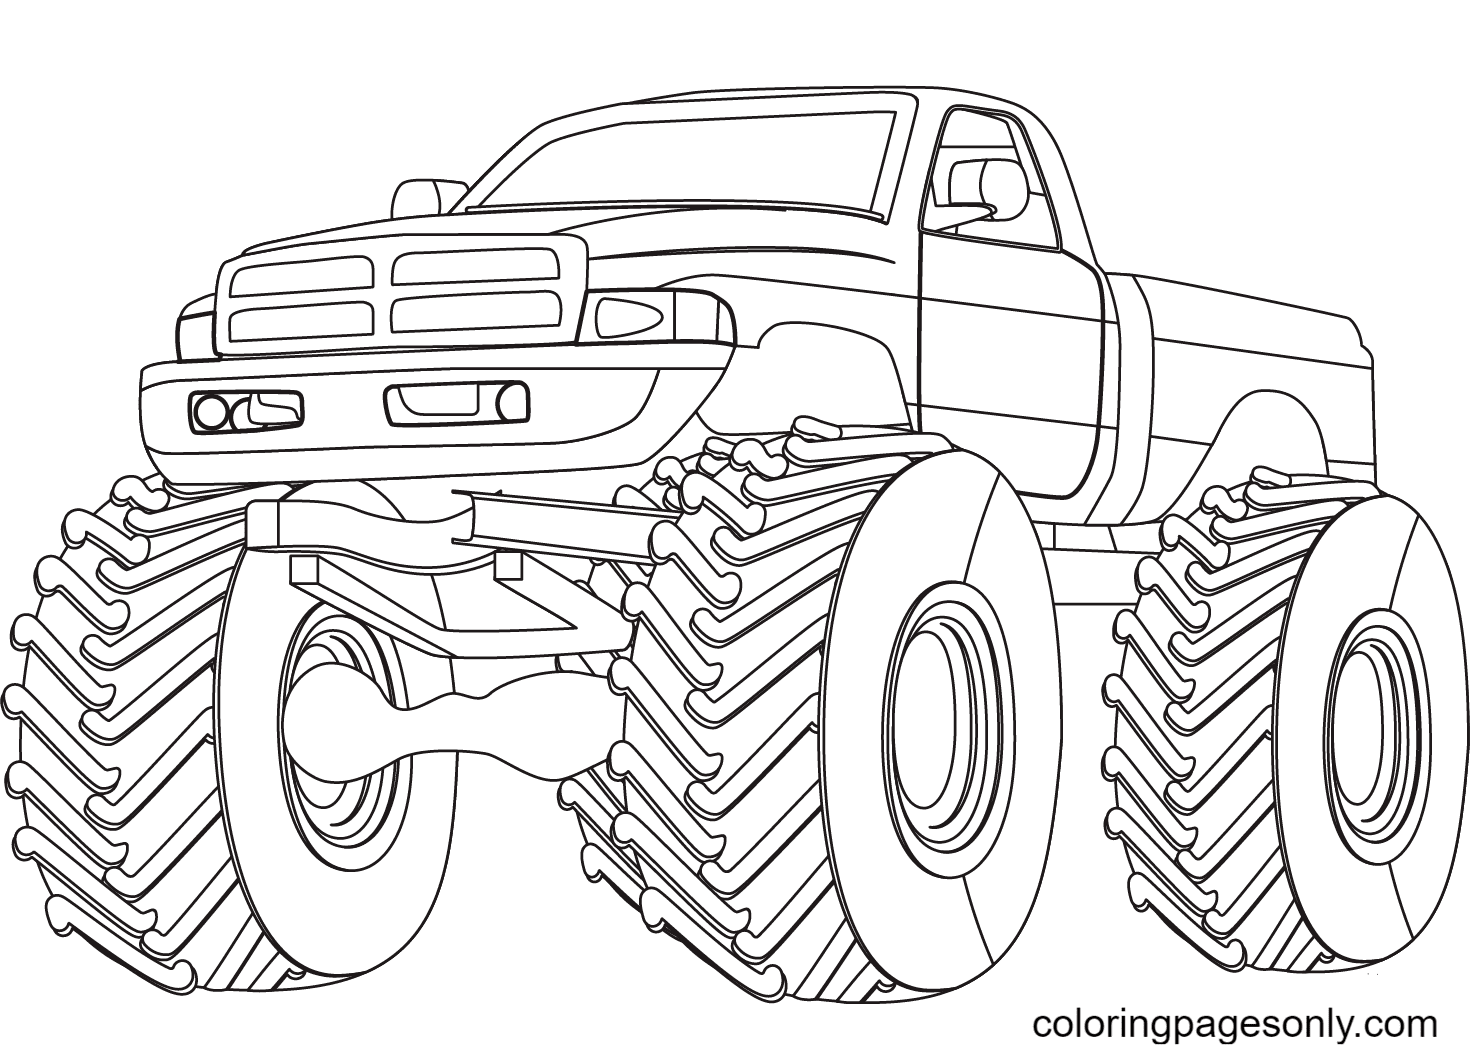 Big wheels monster truck Coloring Pages